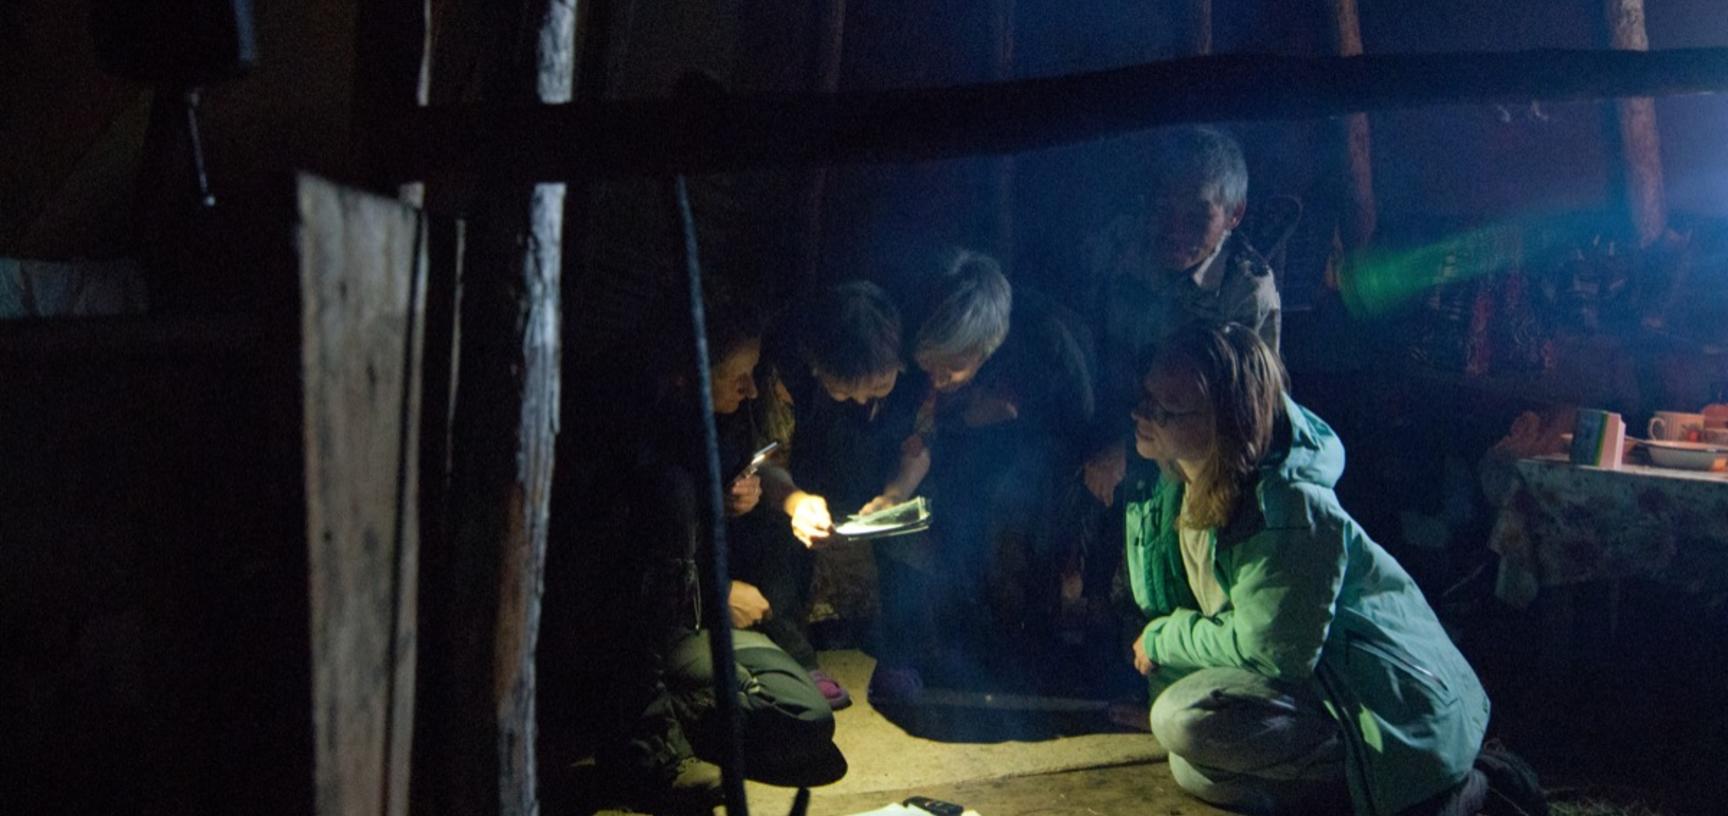 Sharing the digitised Czaplicka collection with Valentina and Nikolay Oyogir, in a dyukcha outside of Chirinda, Evenkia, 2019. Researcher Jaanika Vider leans on the right. Anya Gleizer shines the light from her phone on the left.